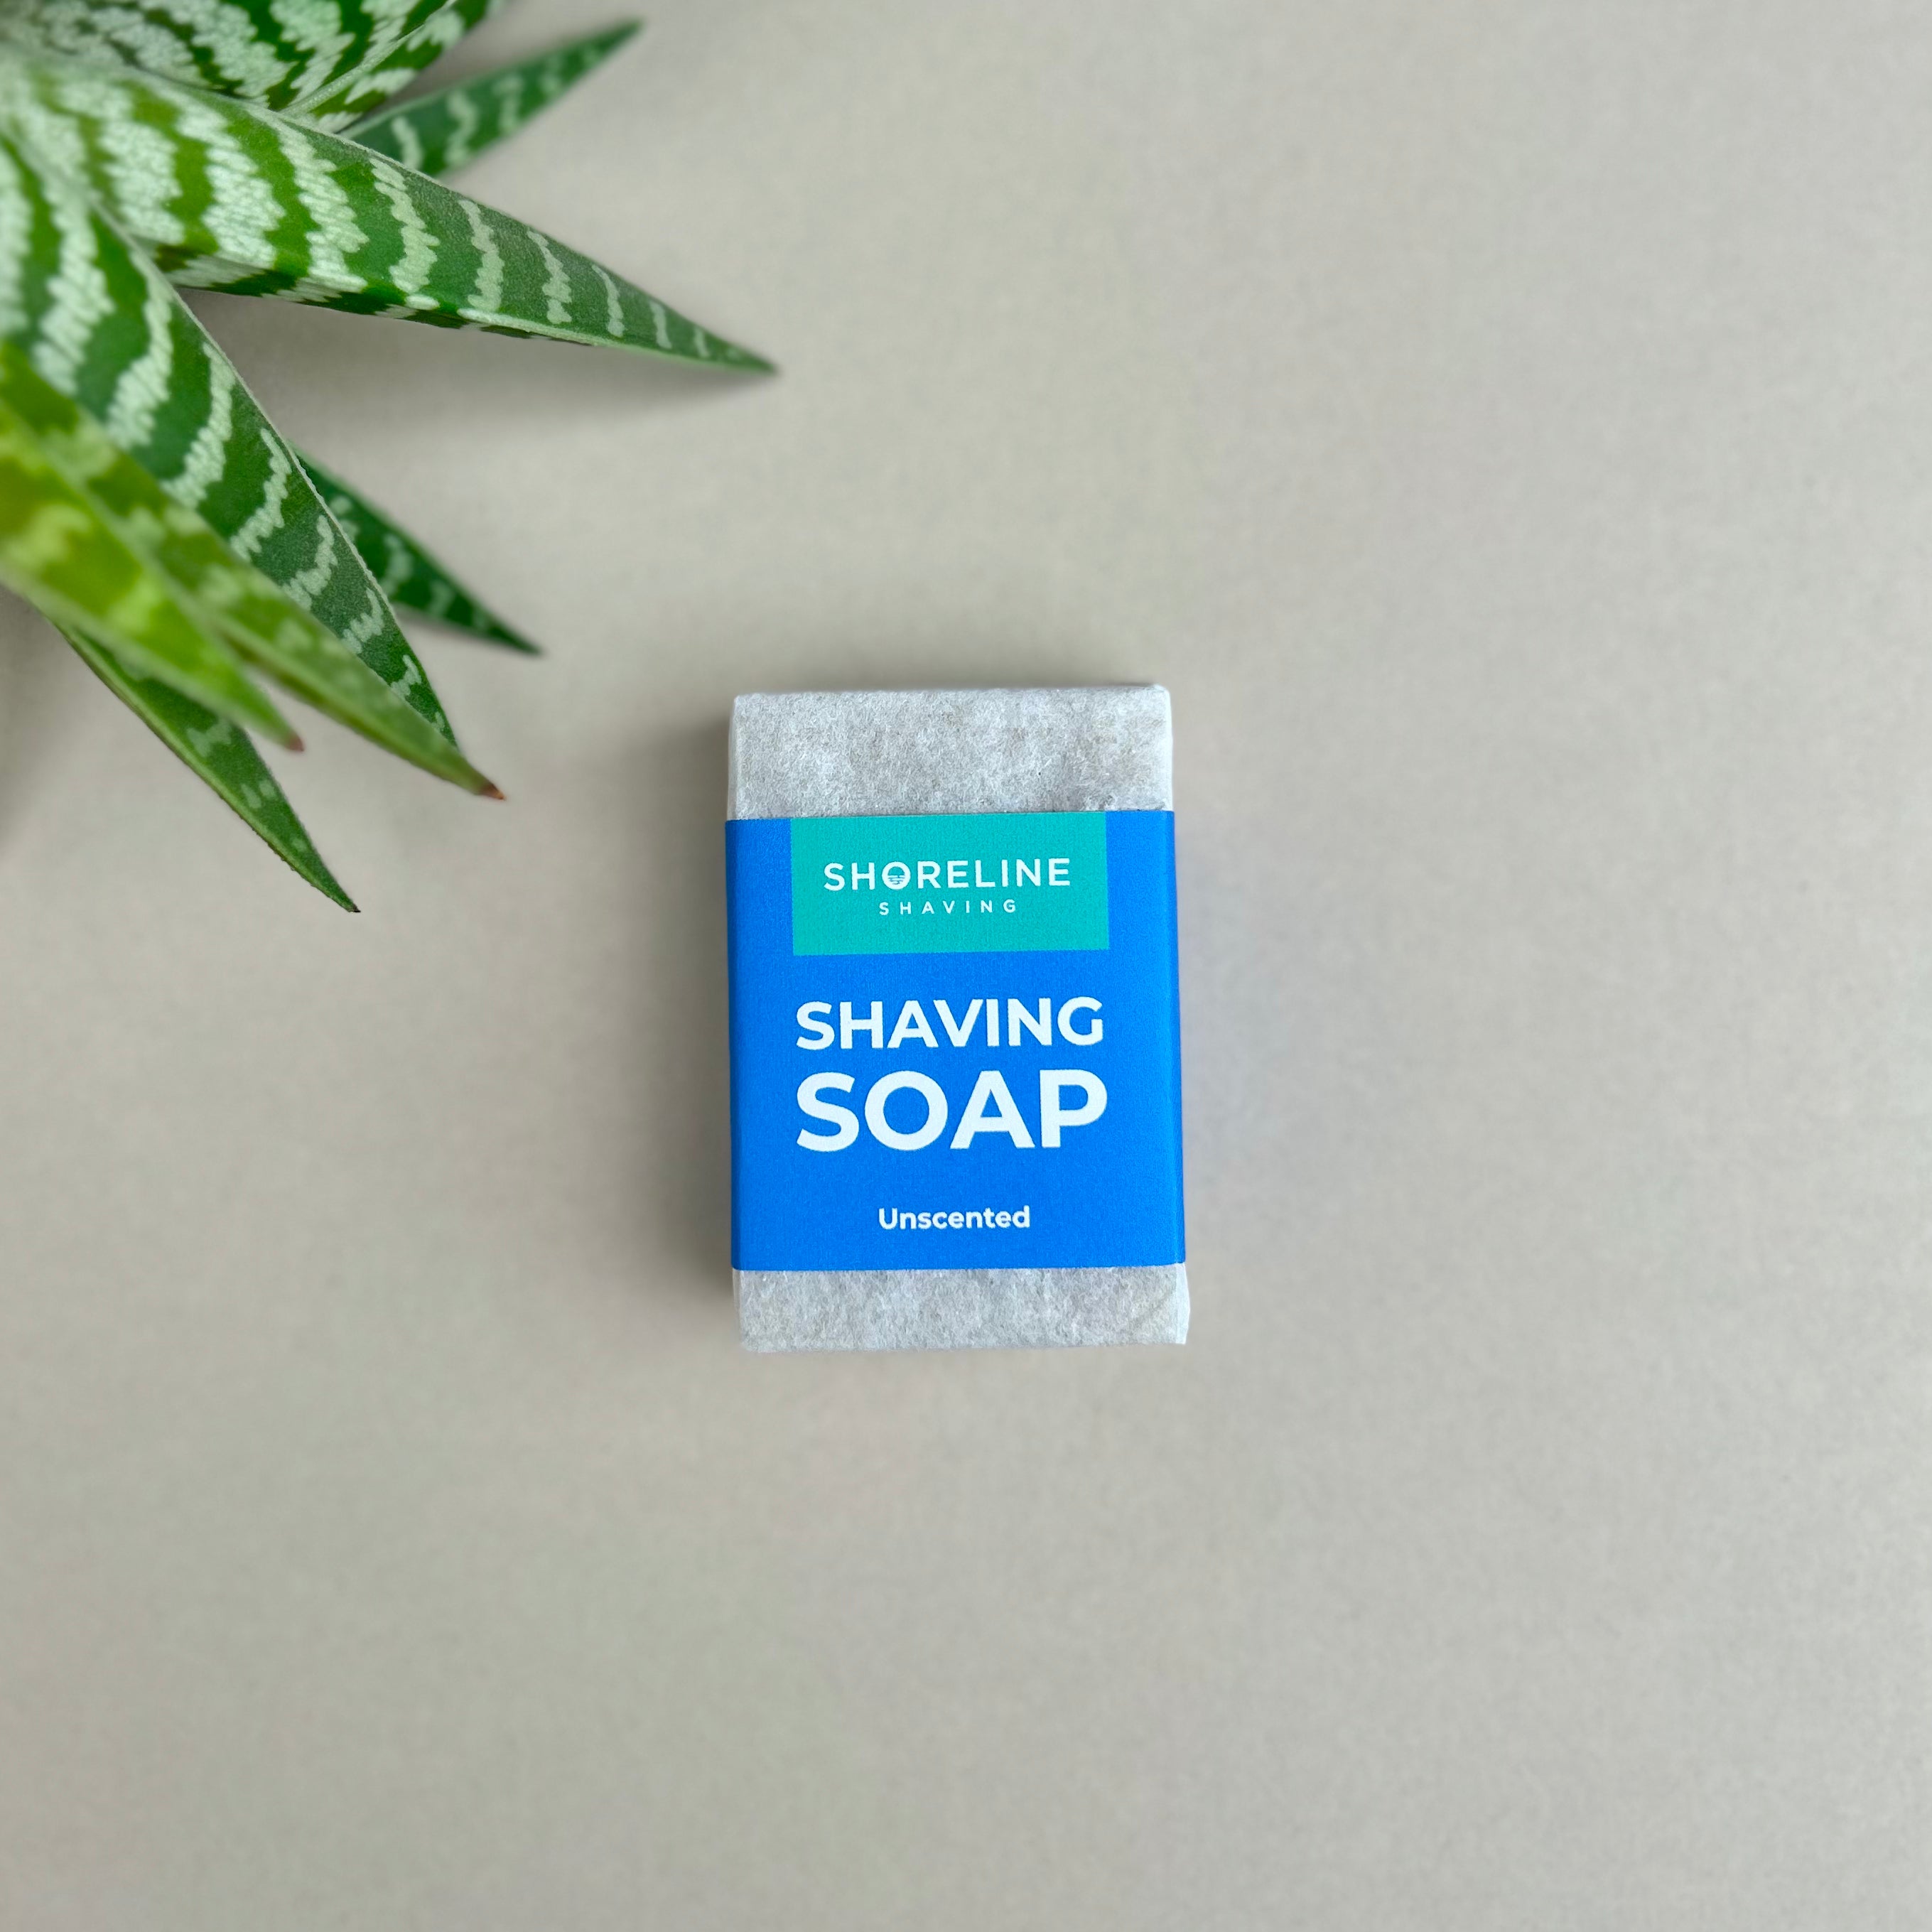 Natural shaving soap on a nude background with a plant in the corner - Shoreline Shaving